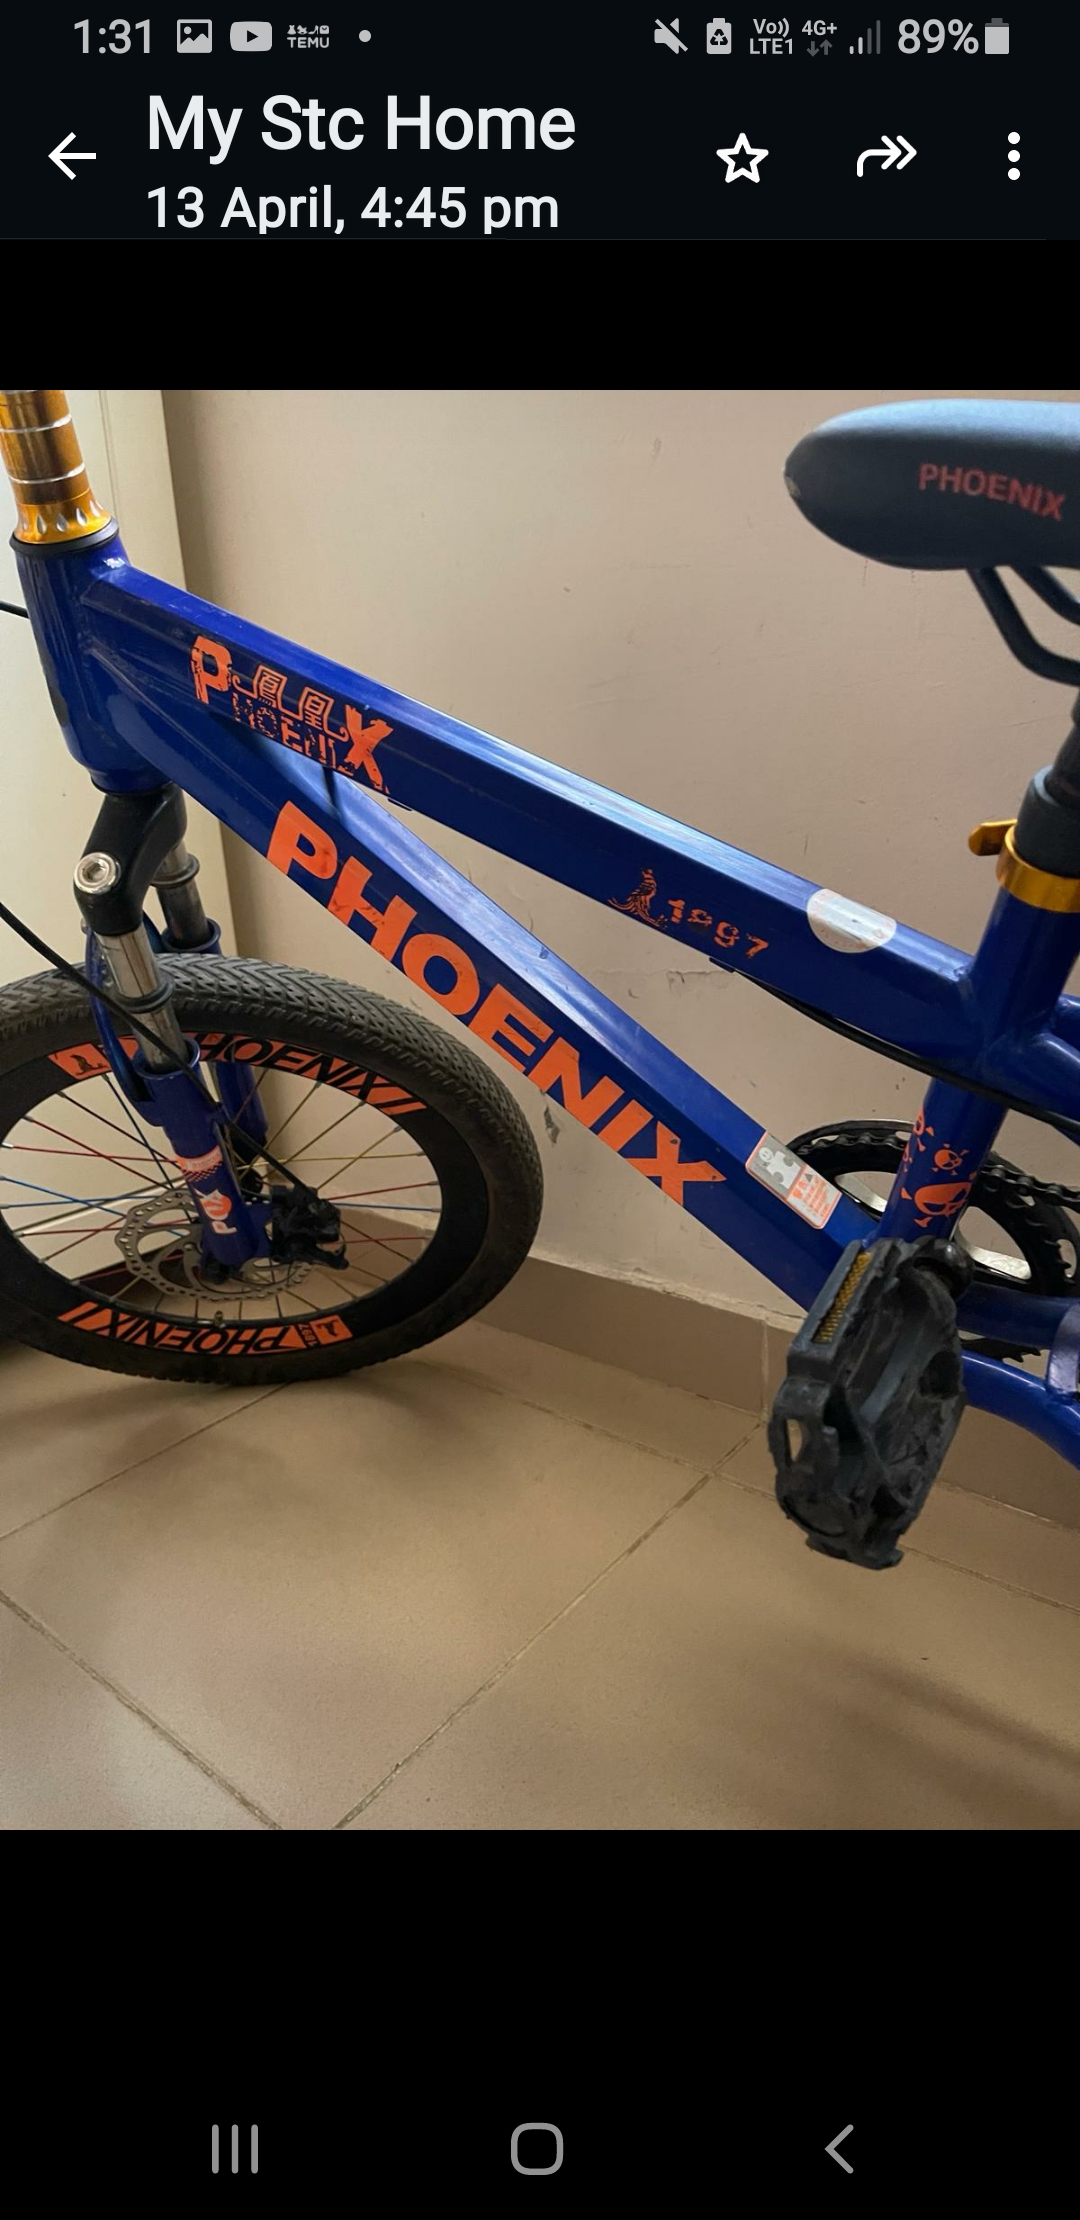 Phoenix cycle for sale in good condition 